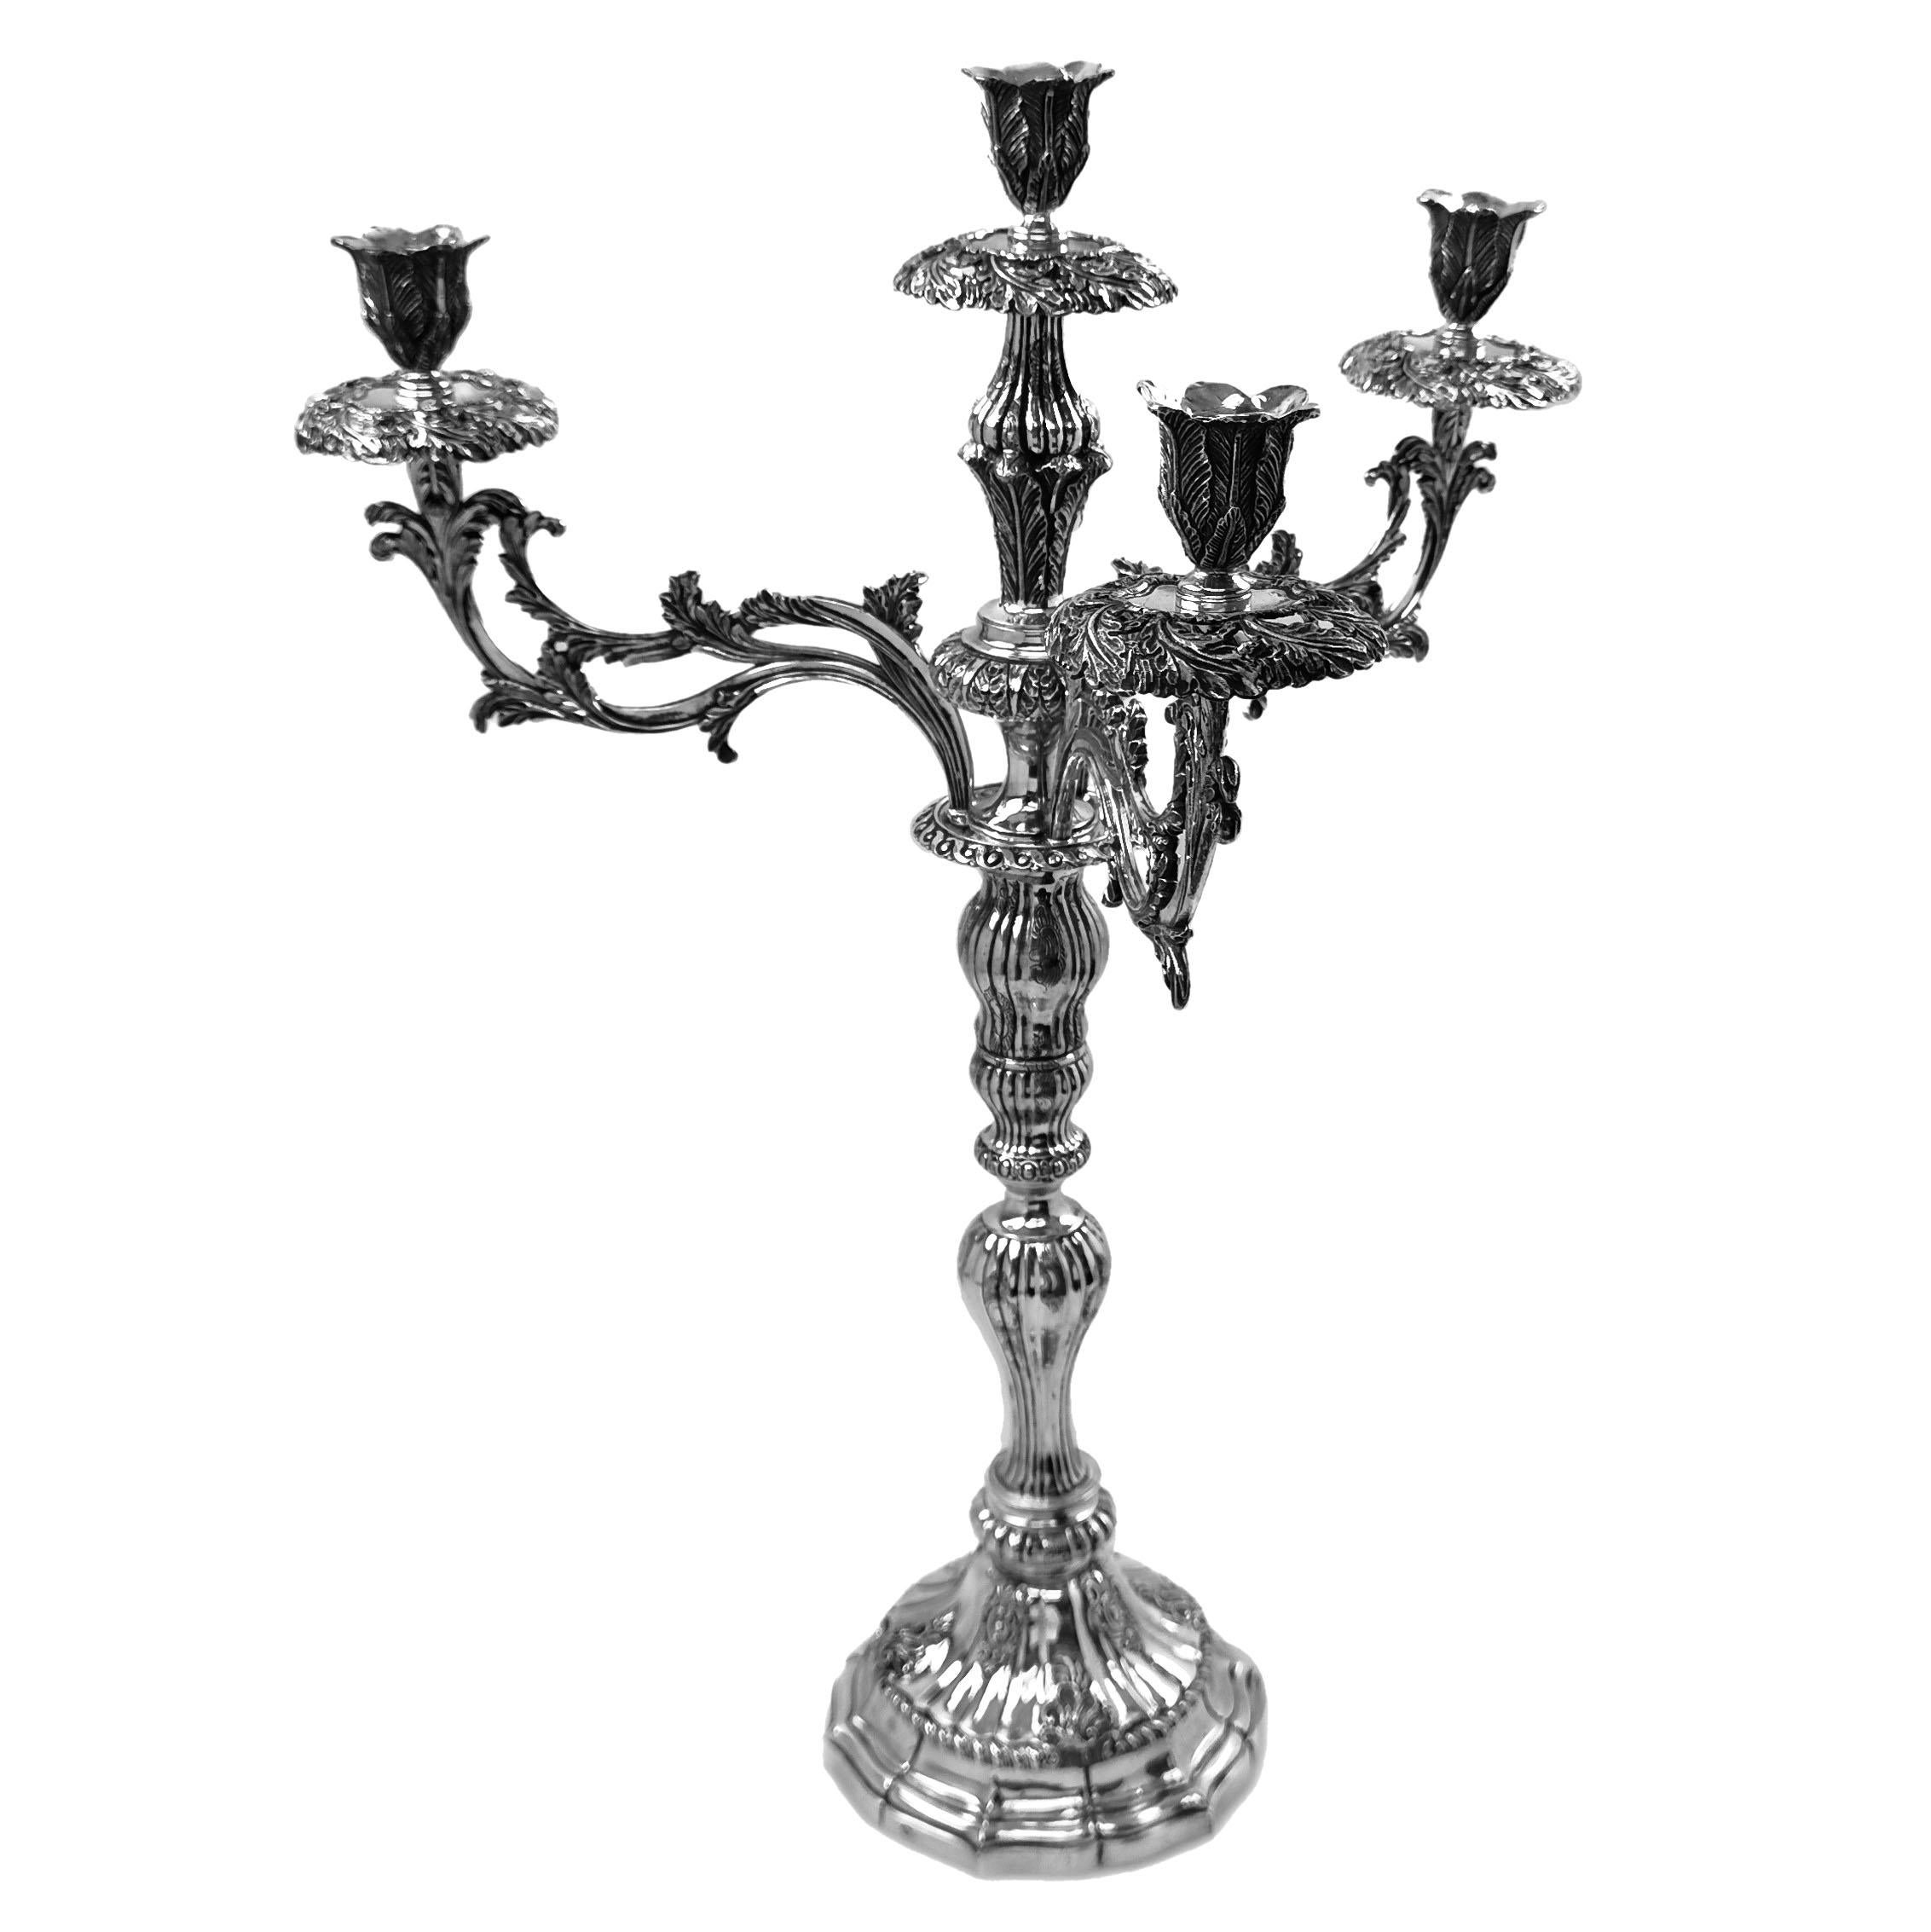 European Rare Pair of Antique Portuguese Silver Candelabra c. 1800 19th Candle Holders For Sale